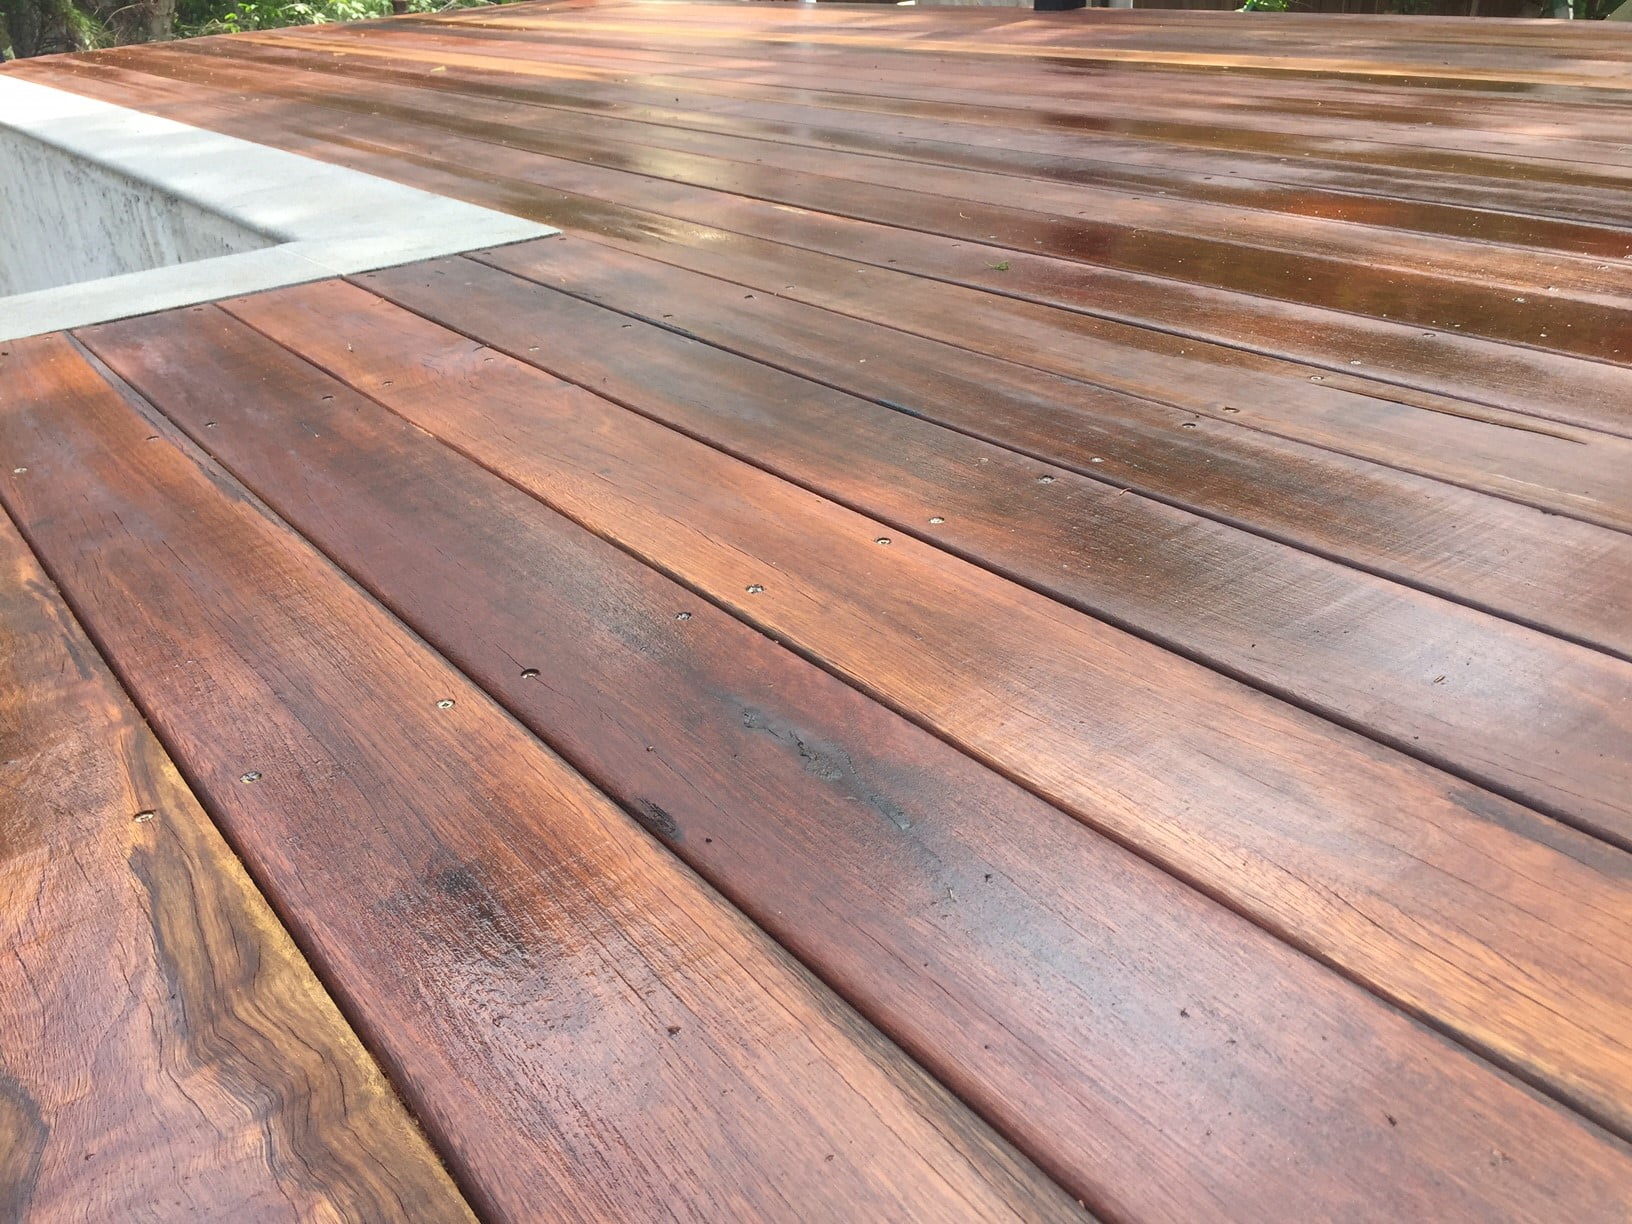 hardwood and composite decking materials